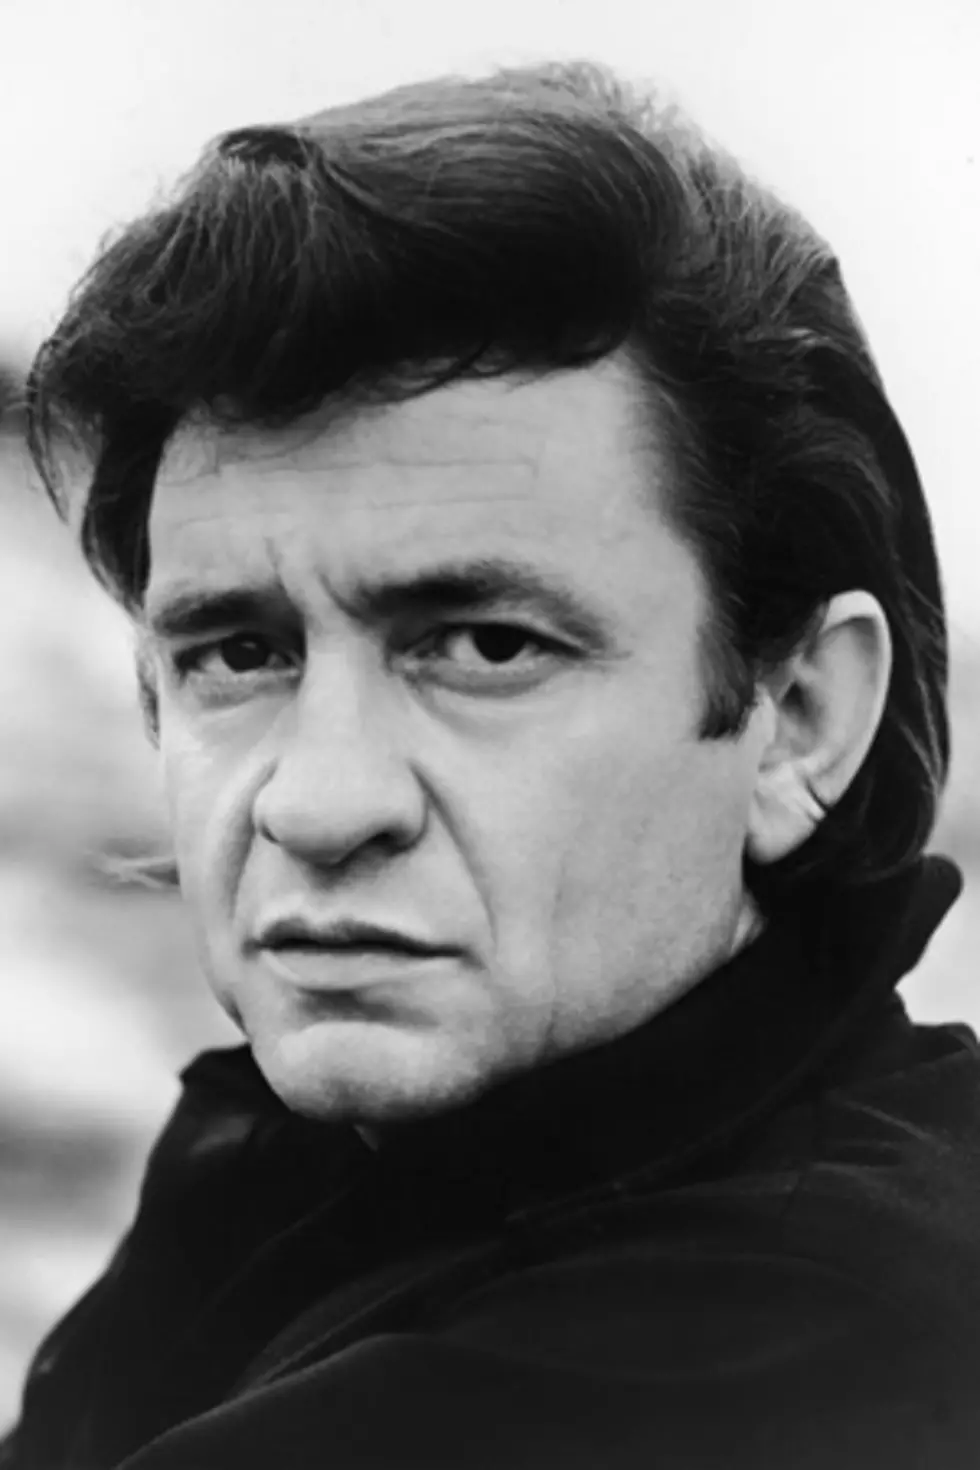 New Johnny Cash Museum Opening Soon in Nashville [PHOTOS]